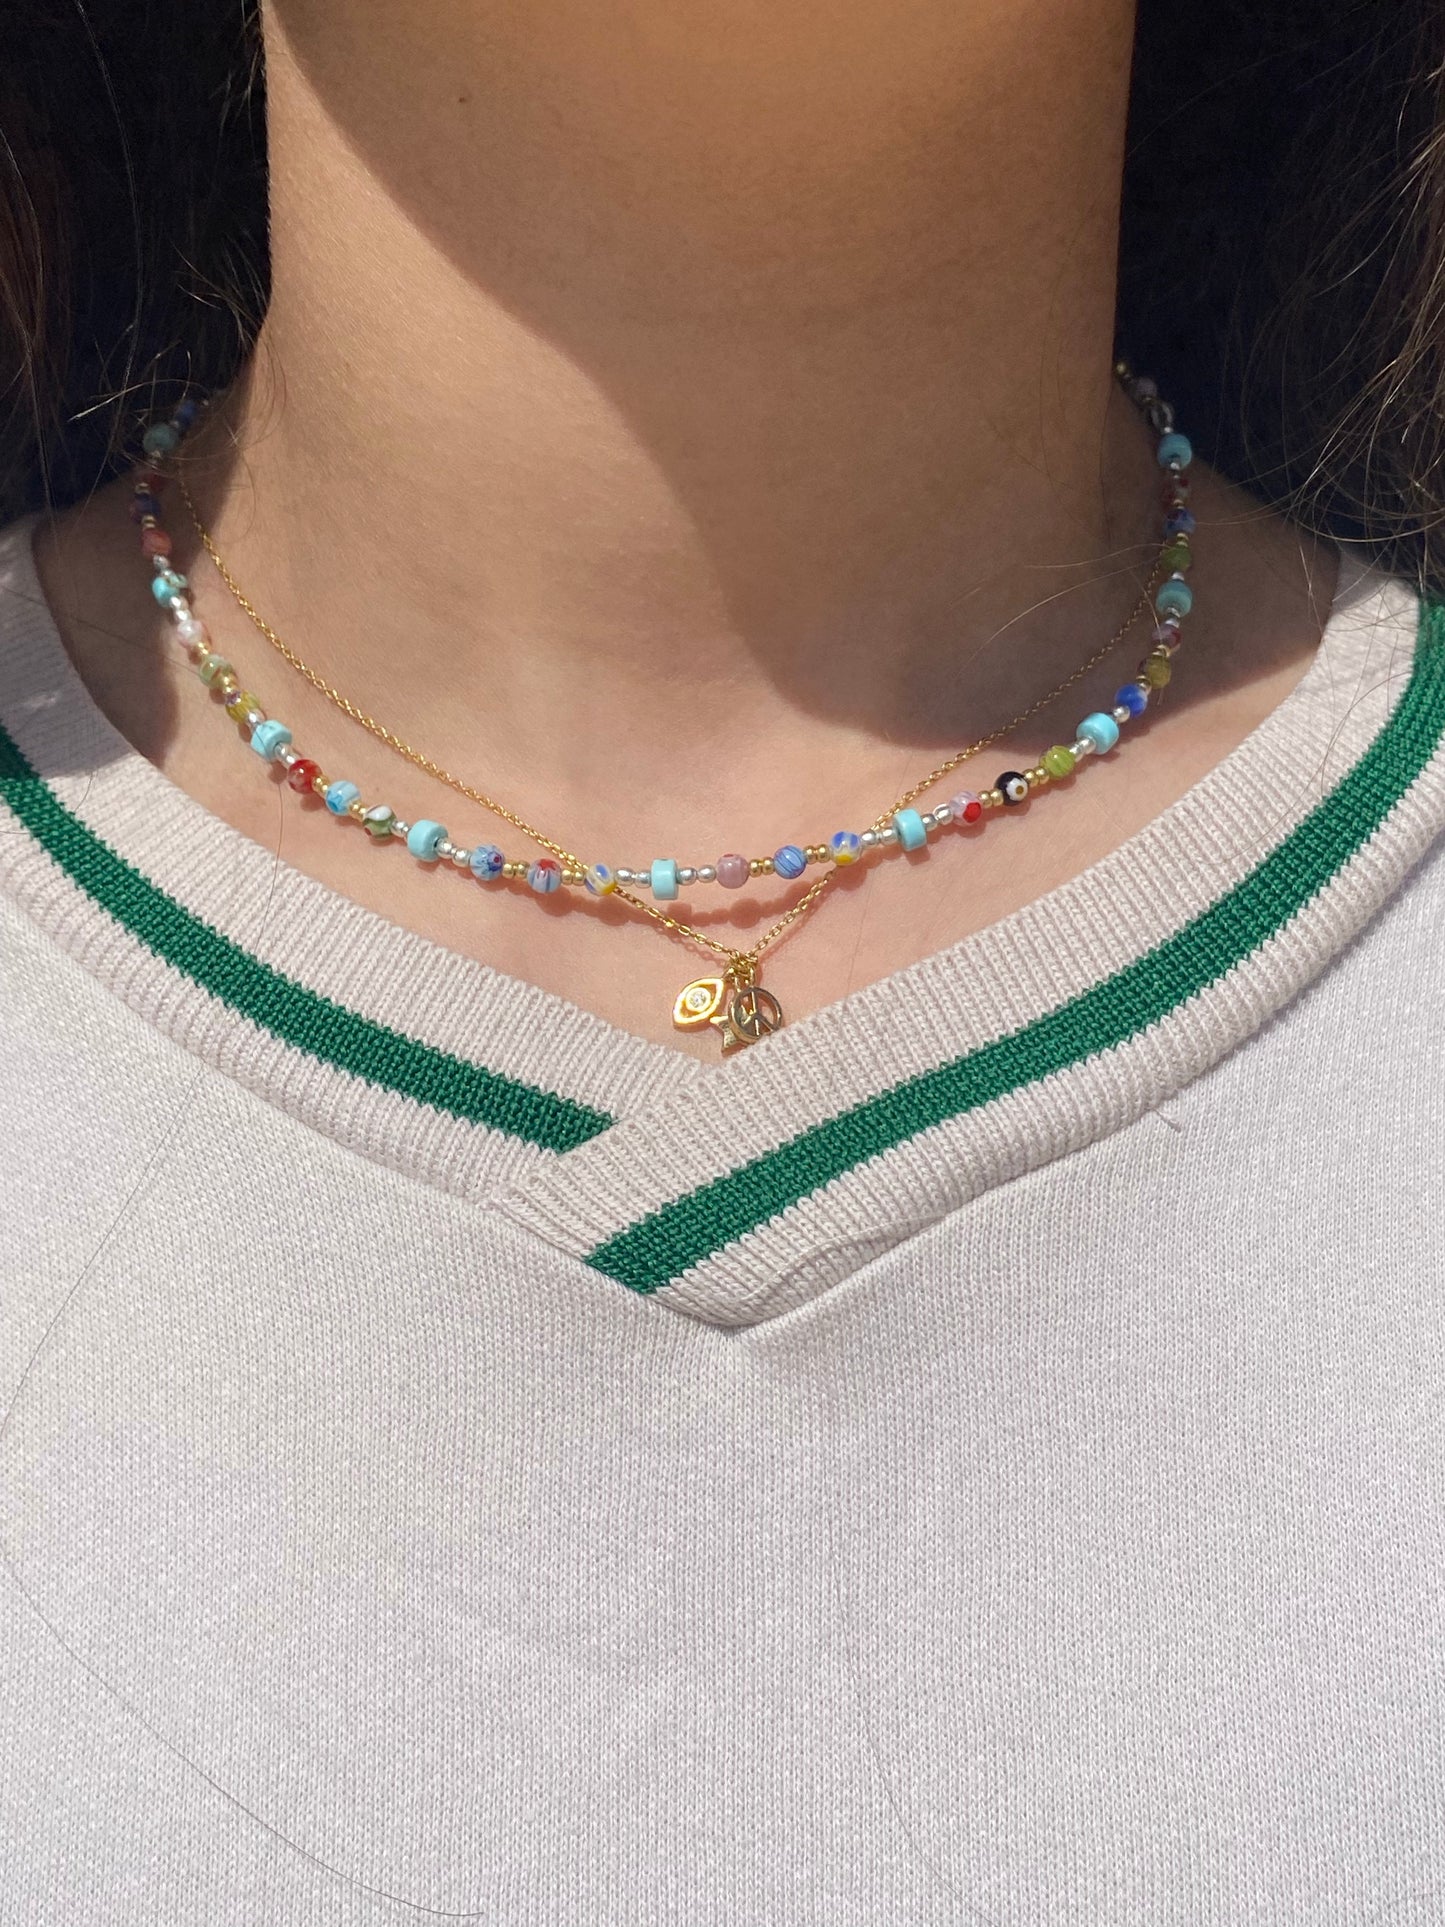 The Sun Soaked Boho necklace